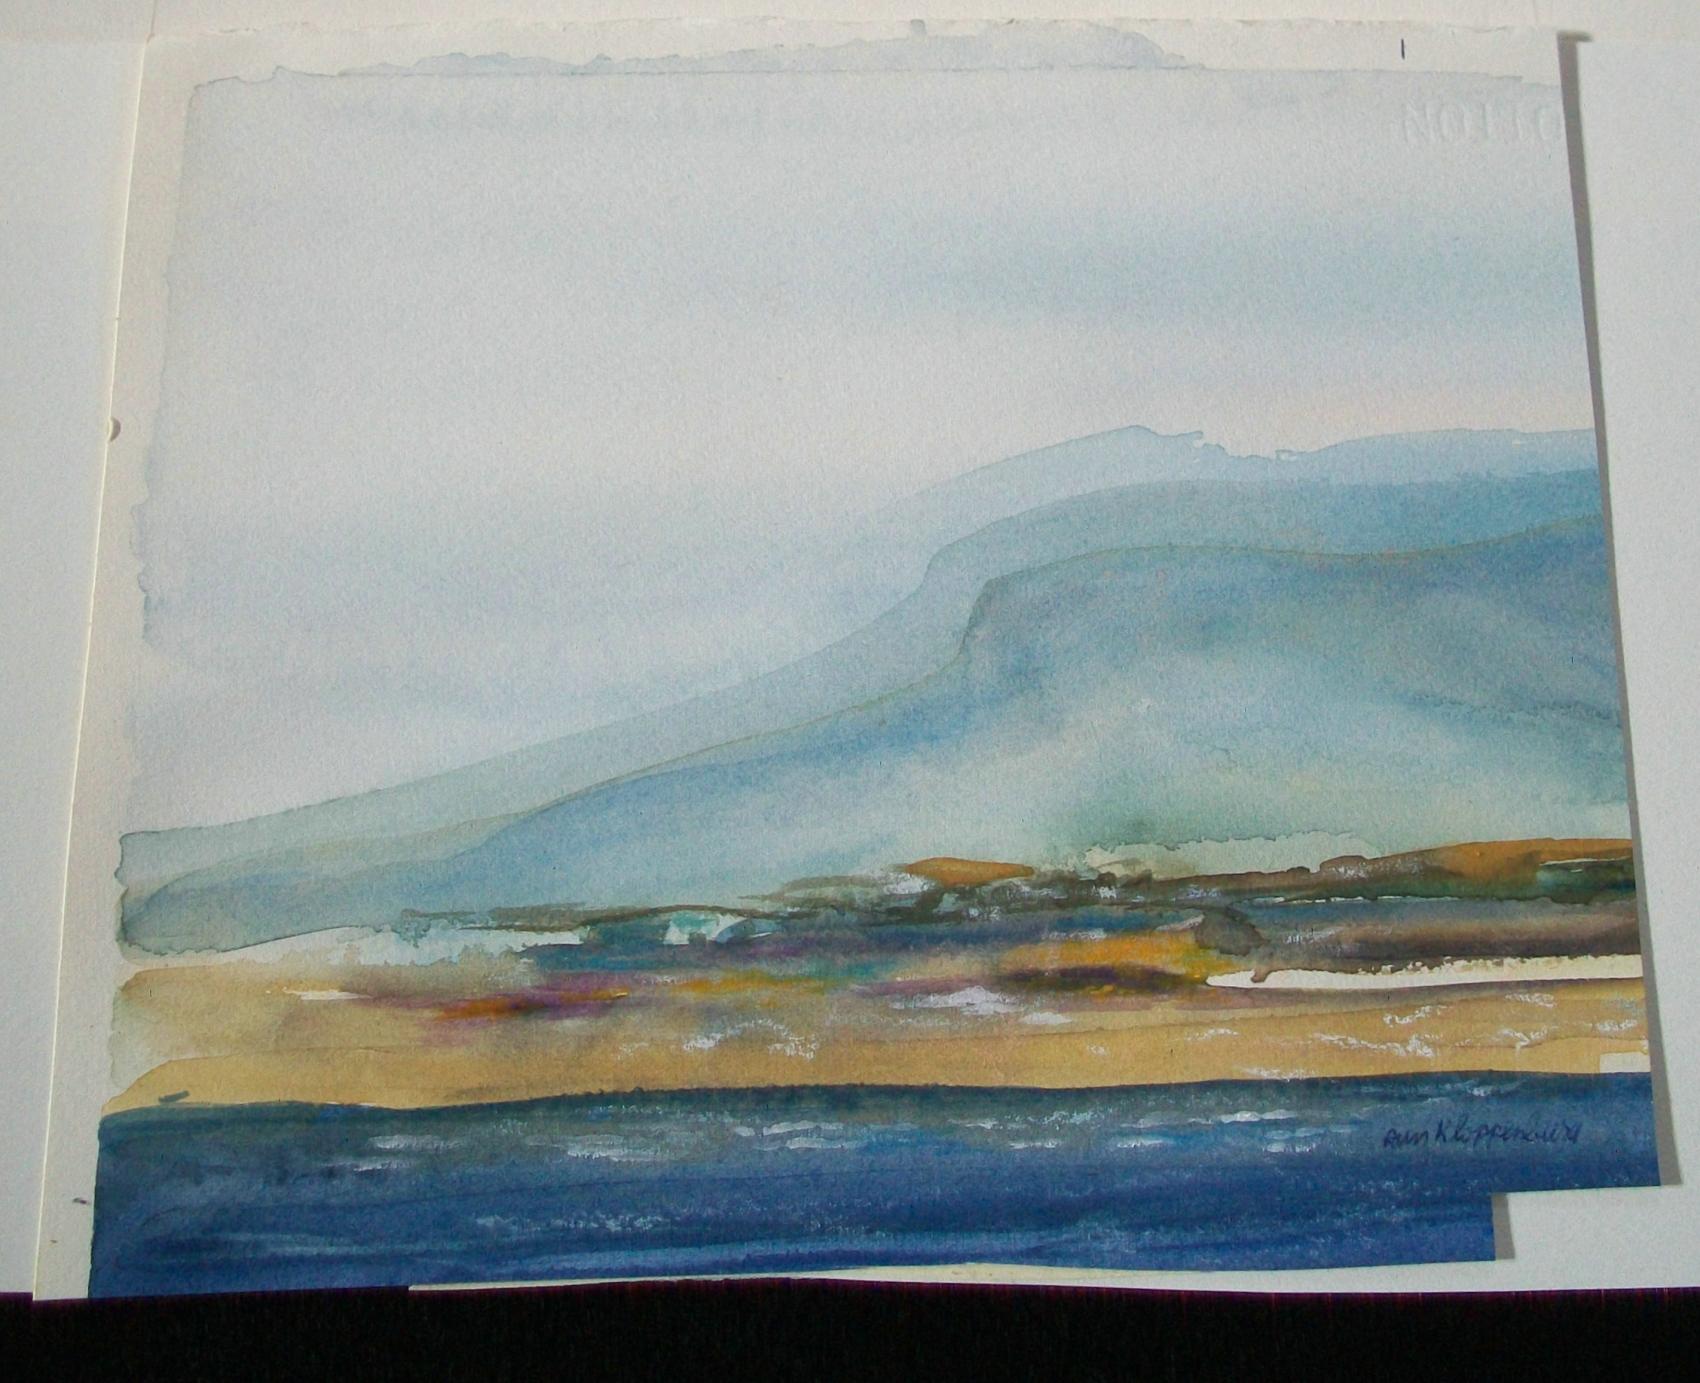 Modern ANN KLOPPENBURG - 'Mullaghmore Beach' - Watercolor Painting - Canada - C. 1990's For Sale